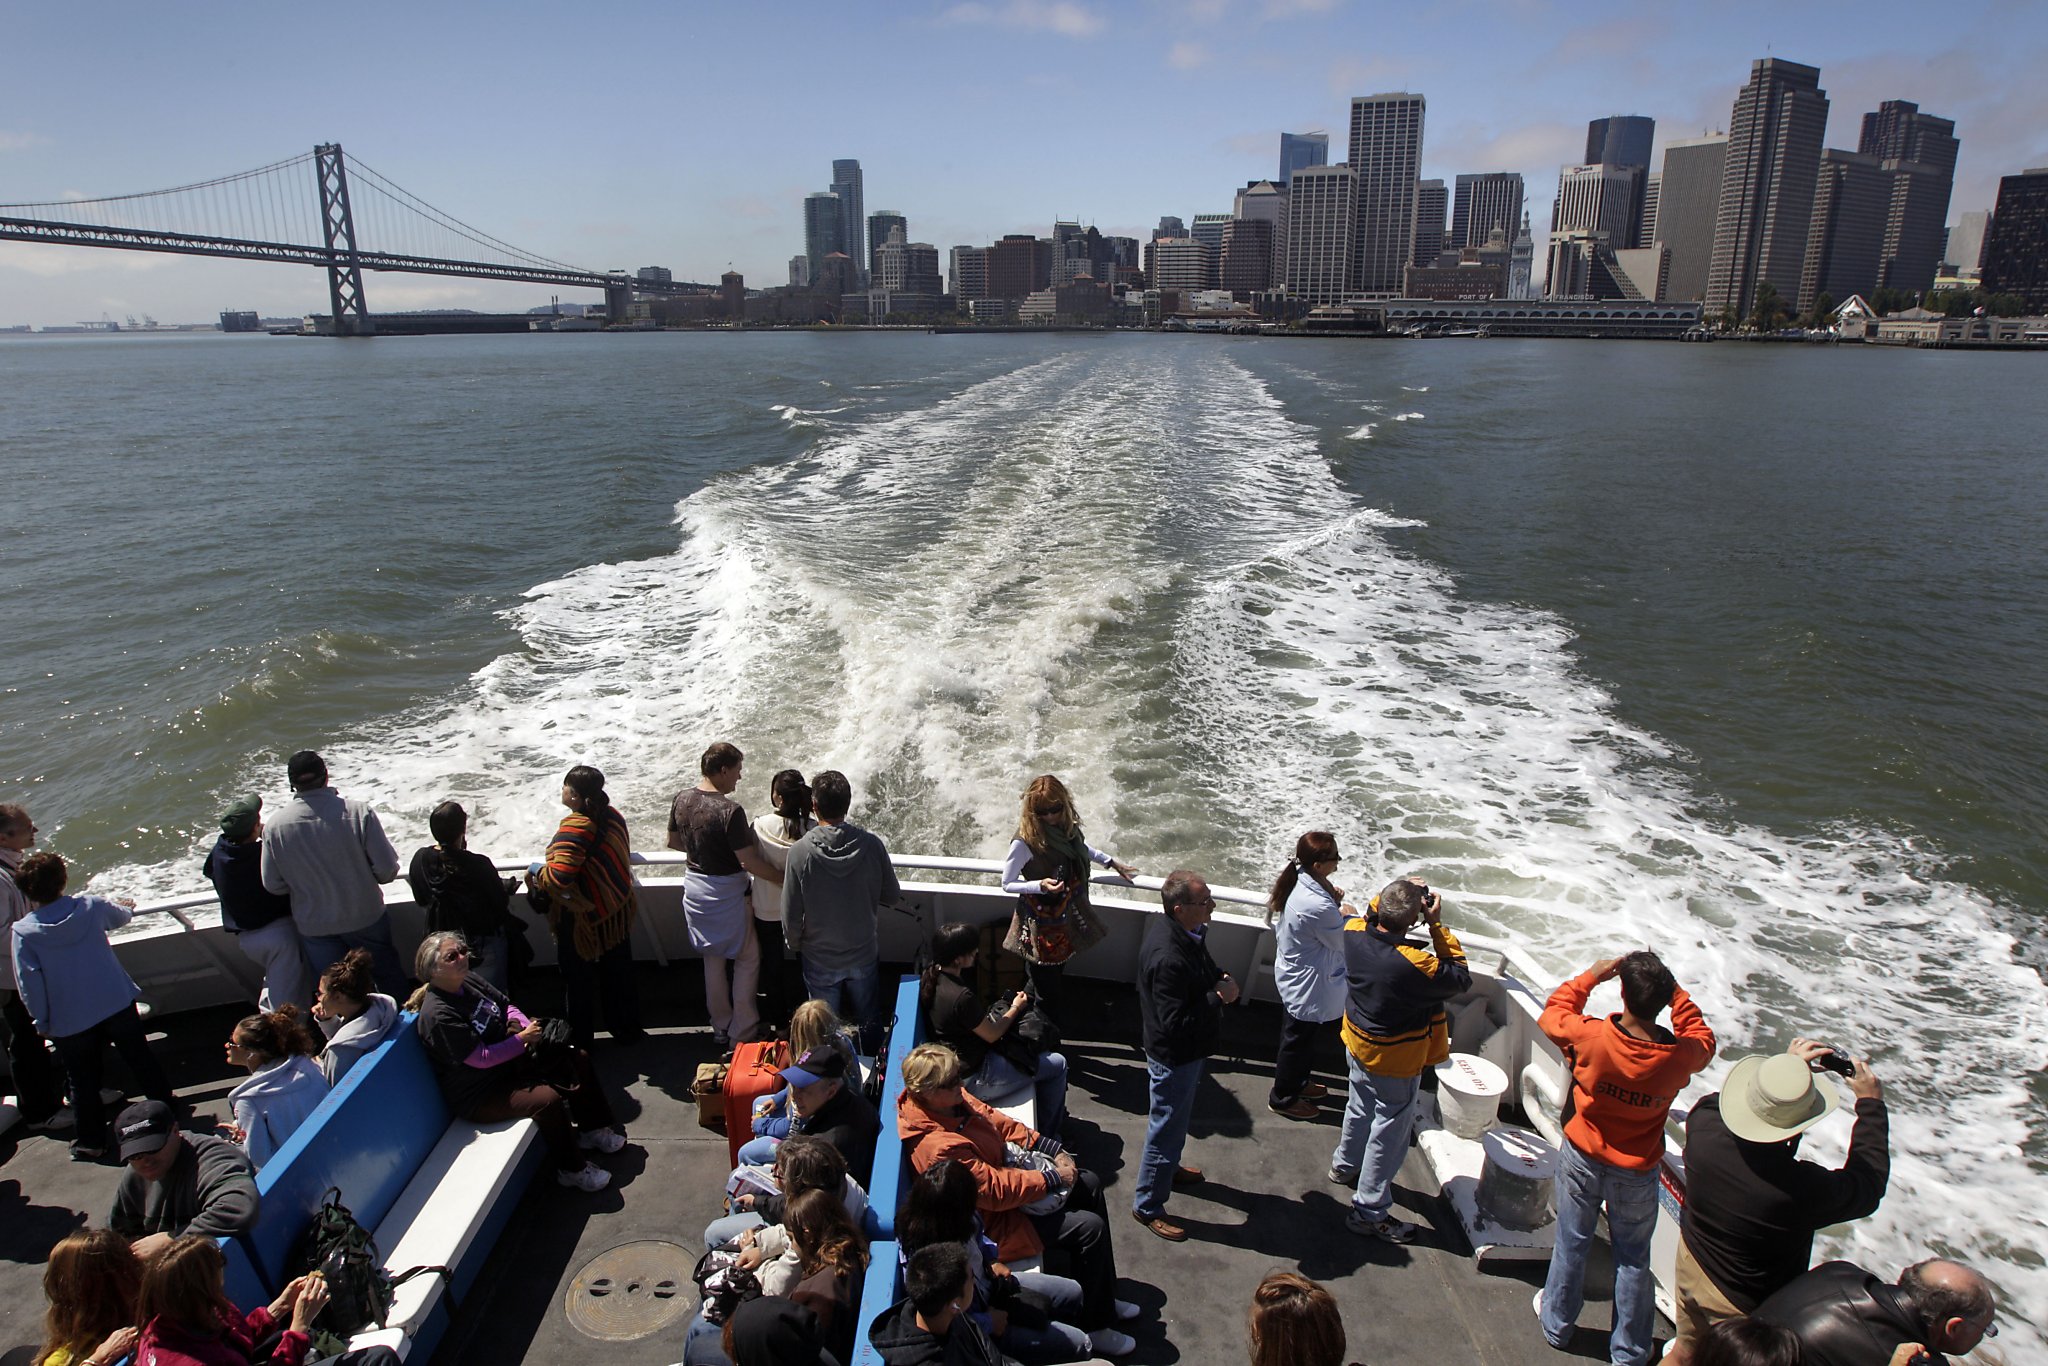 $4 million grant to expand san francisco bay ferry service - sfgate